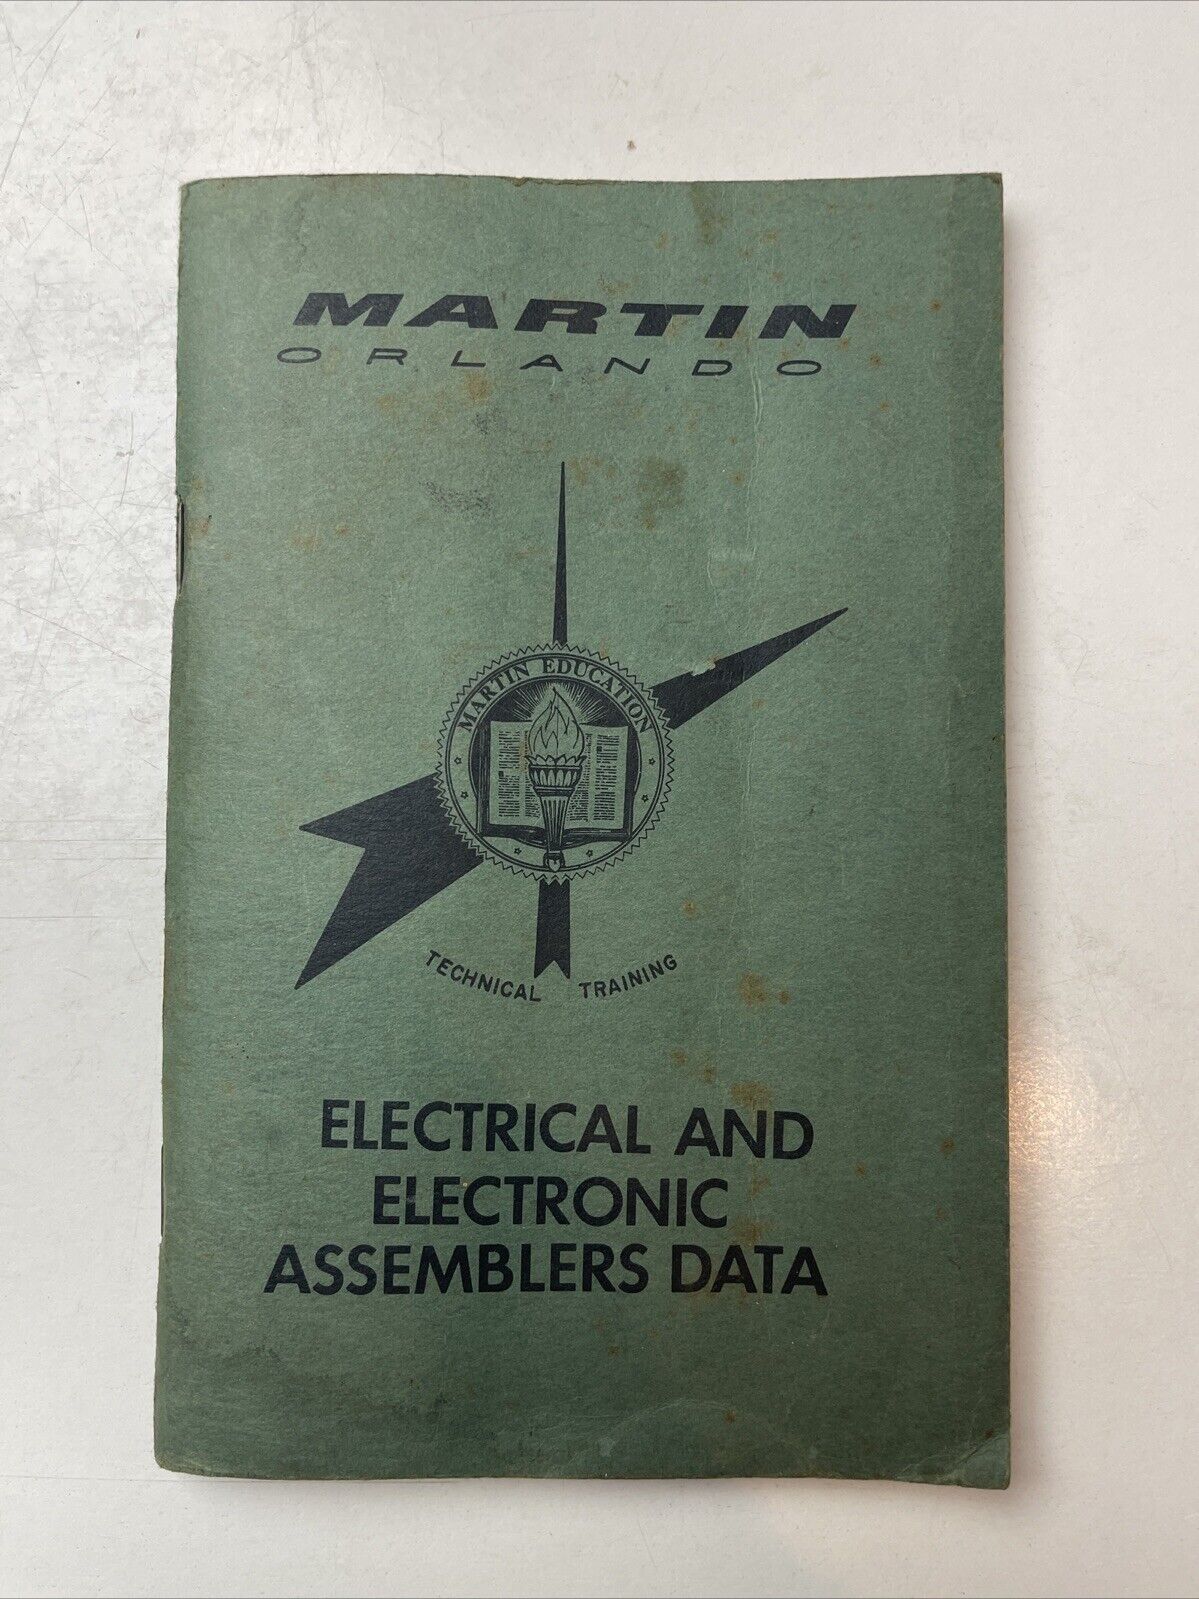 Martin Orlando Electrical And Electronic Assemblers Data 1958 Rare VTG